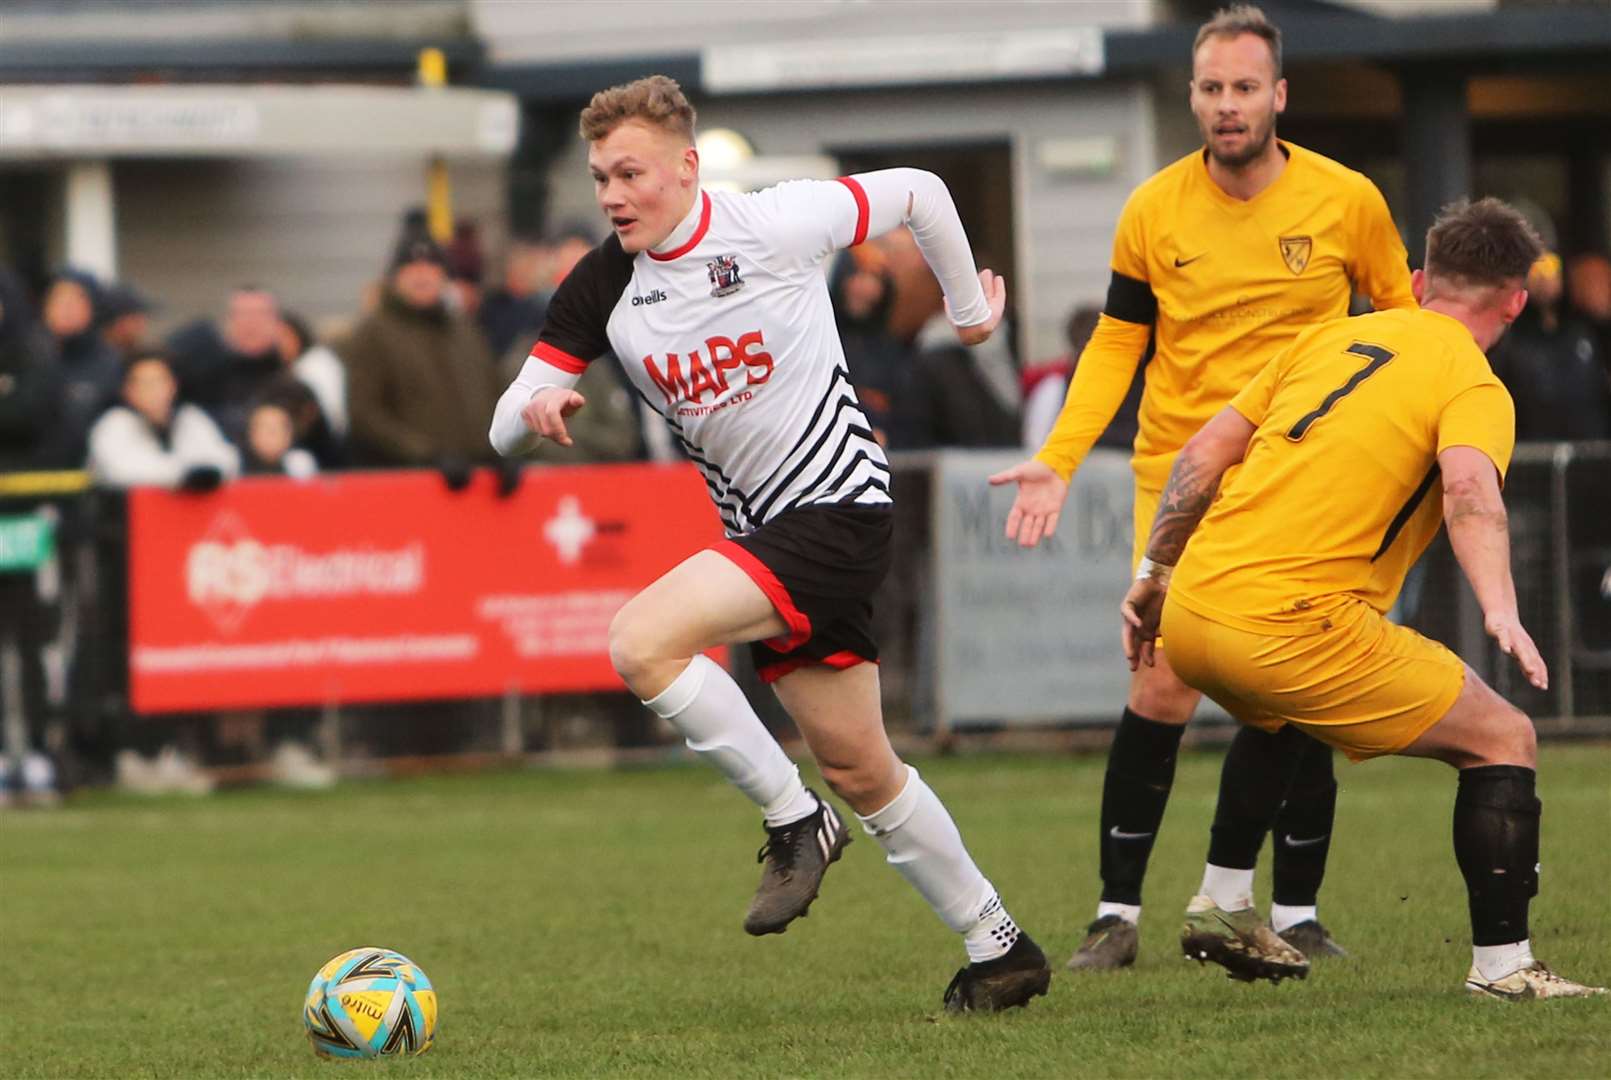 On-loan Deal defender Alex Green also netted against Snodland. Picture: Paul Willmott